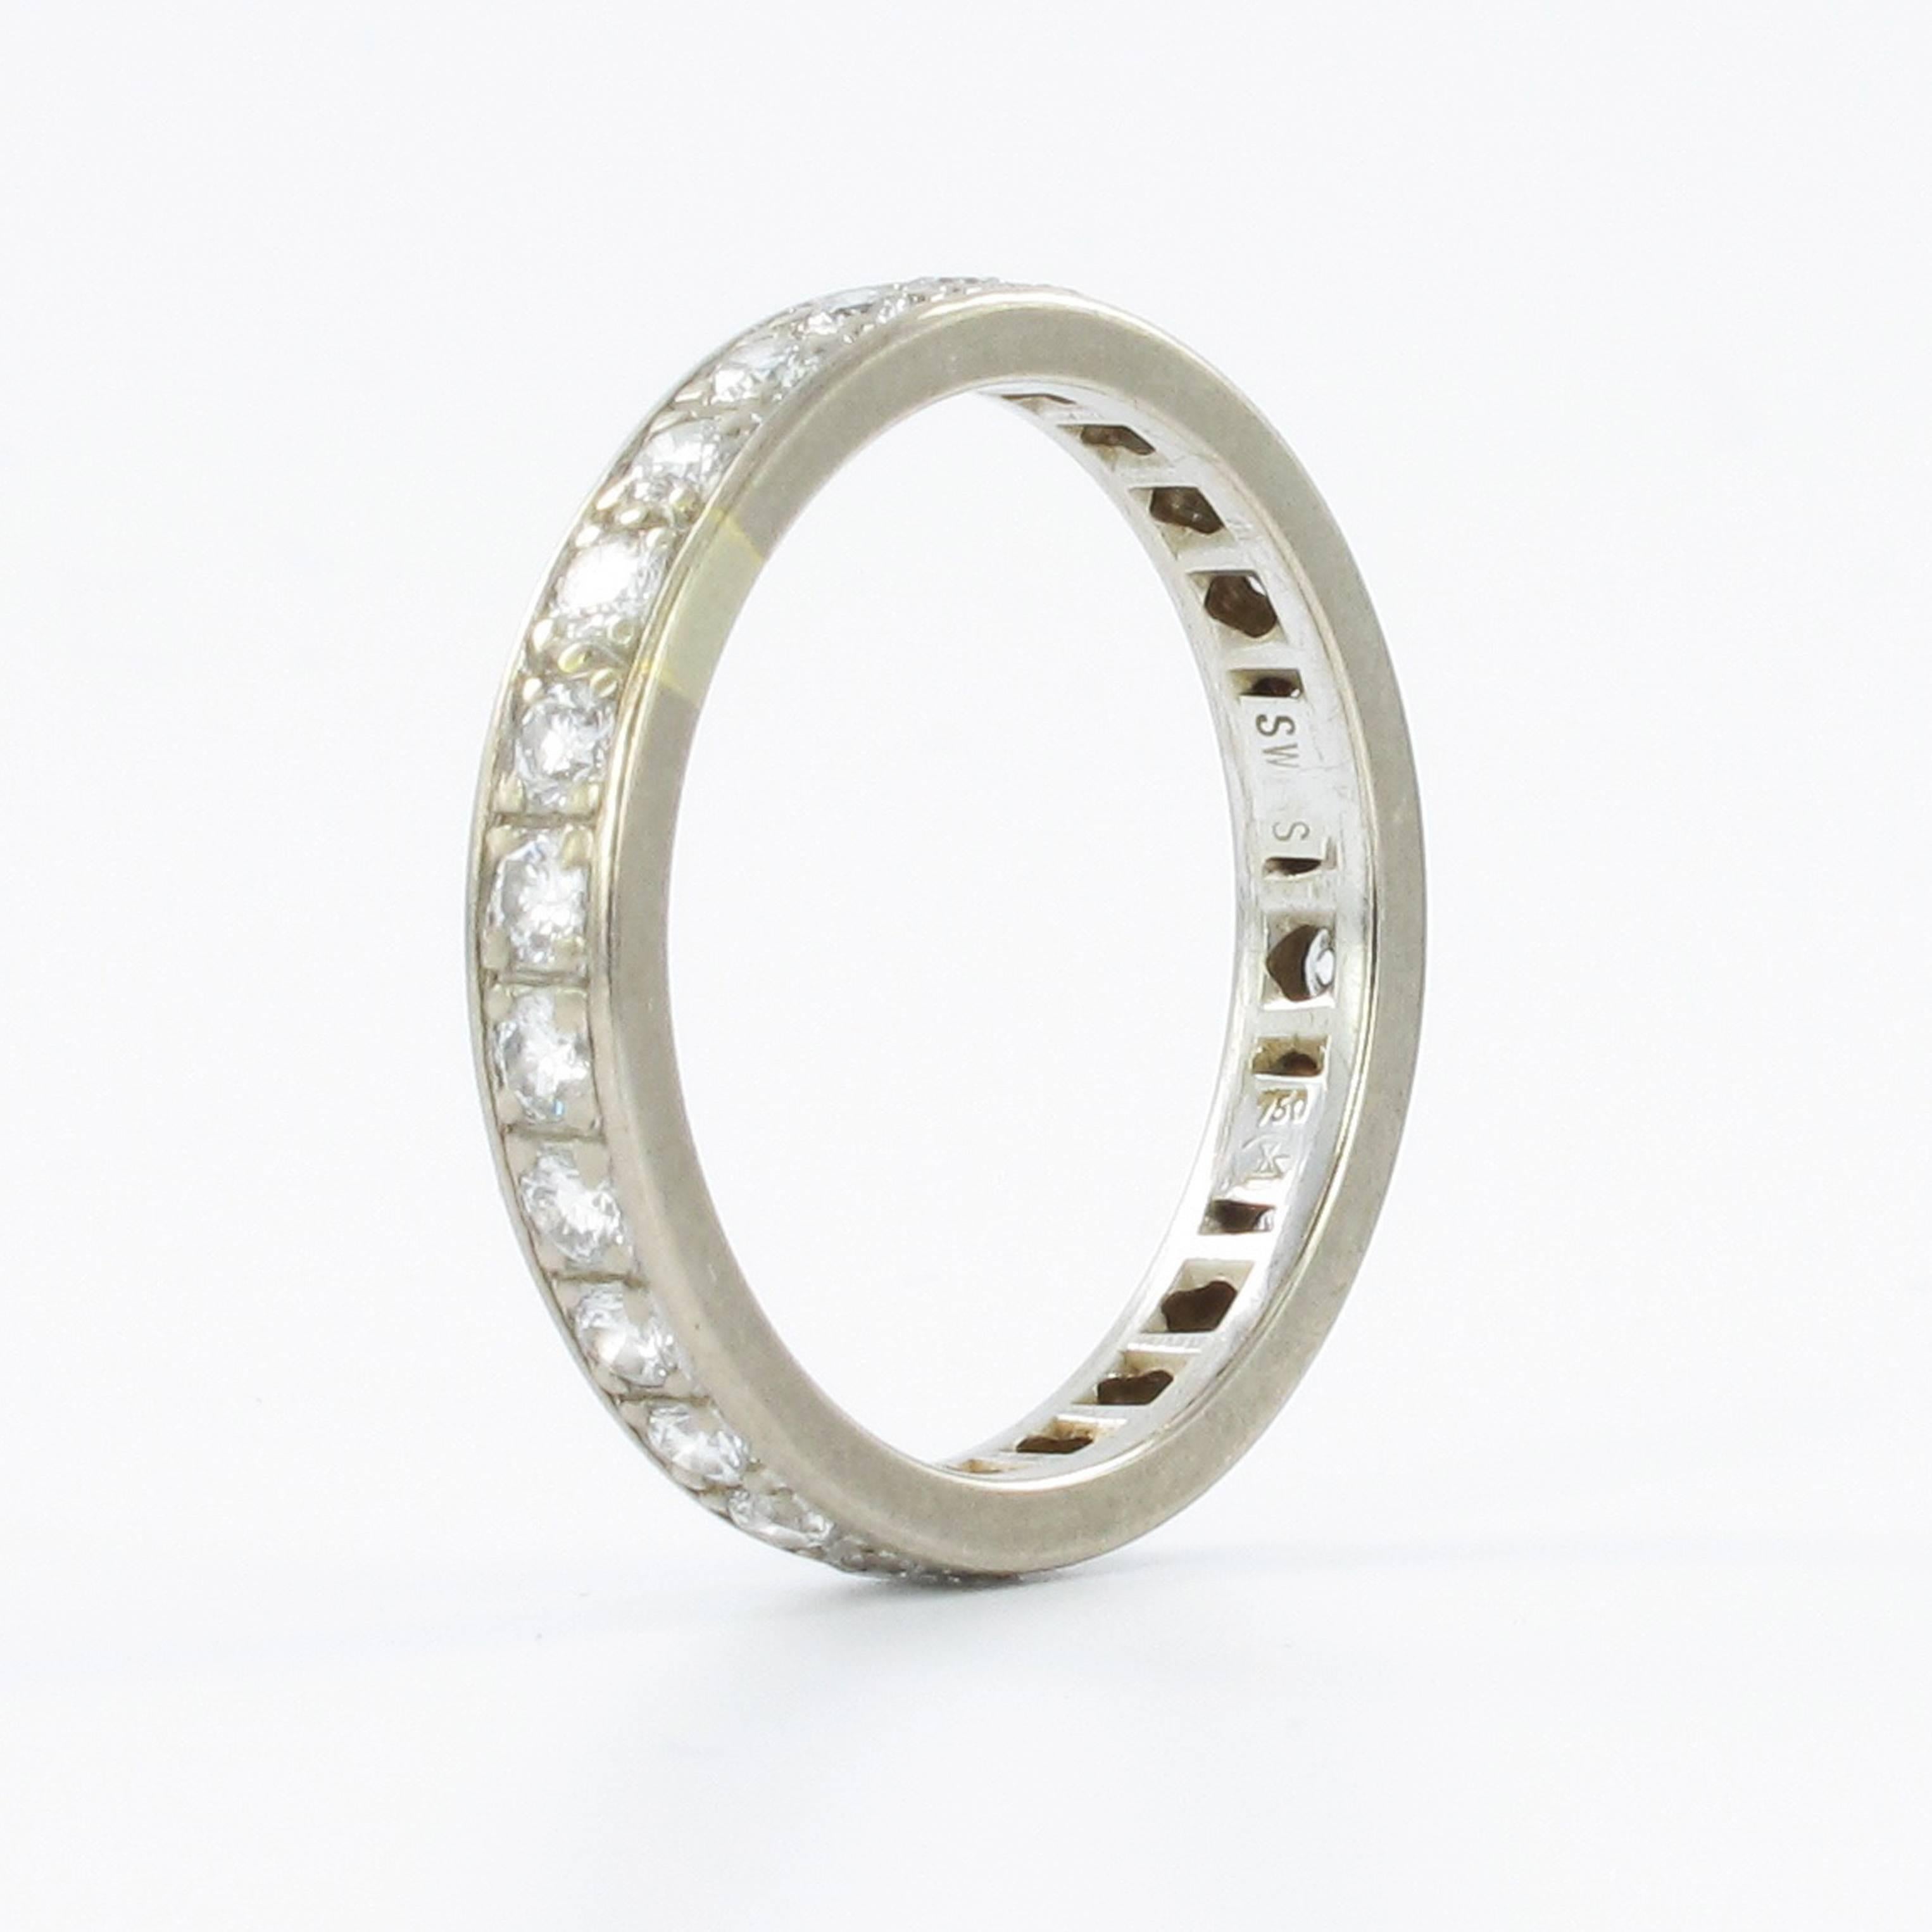 Diamond eternity band in 18 karat white gold. Featuring 26 round brilliant cut diamonds with G-H colour and vs clarity. Total weight approximately 1.05 carats. 

Size 58.5

Maker's mark: Gübelin

Stock Number: 1000181286